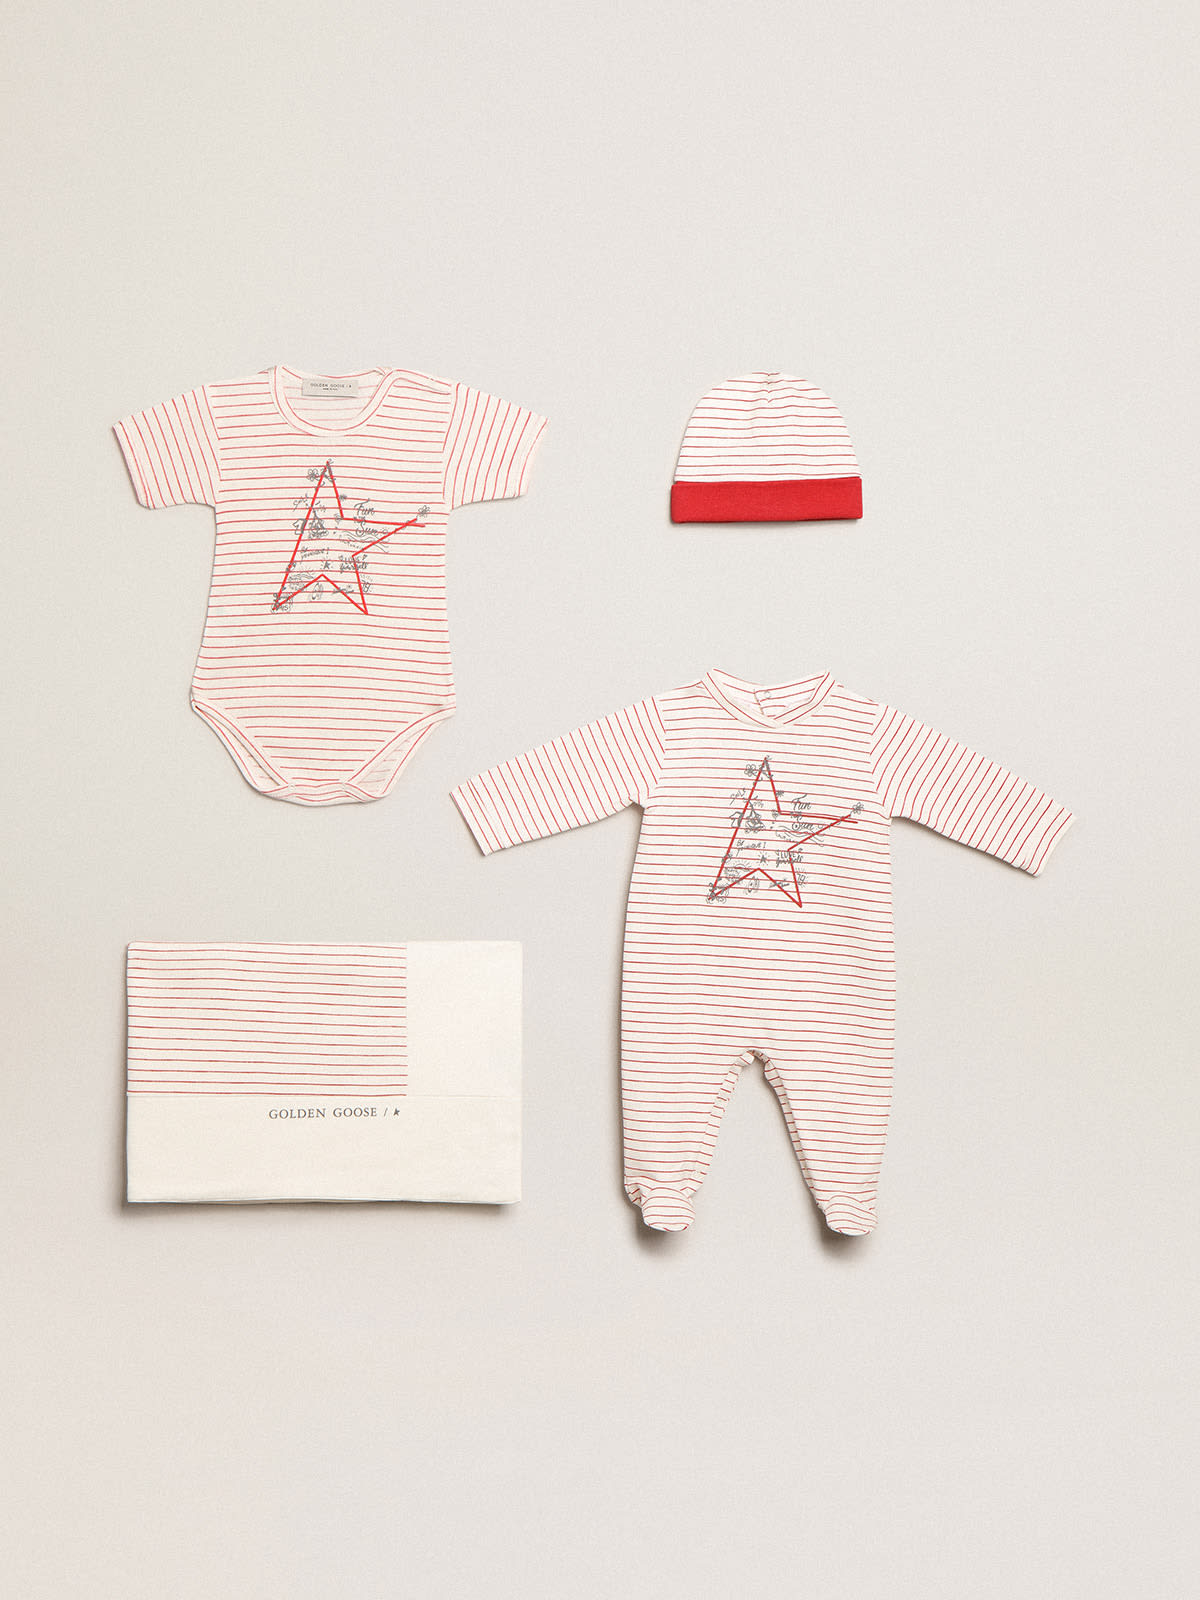 Golden Goose - Baby gift set in ecru cotton with red star and stripes in 